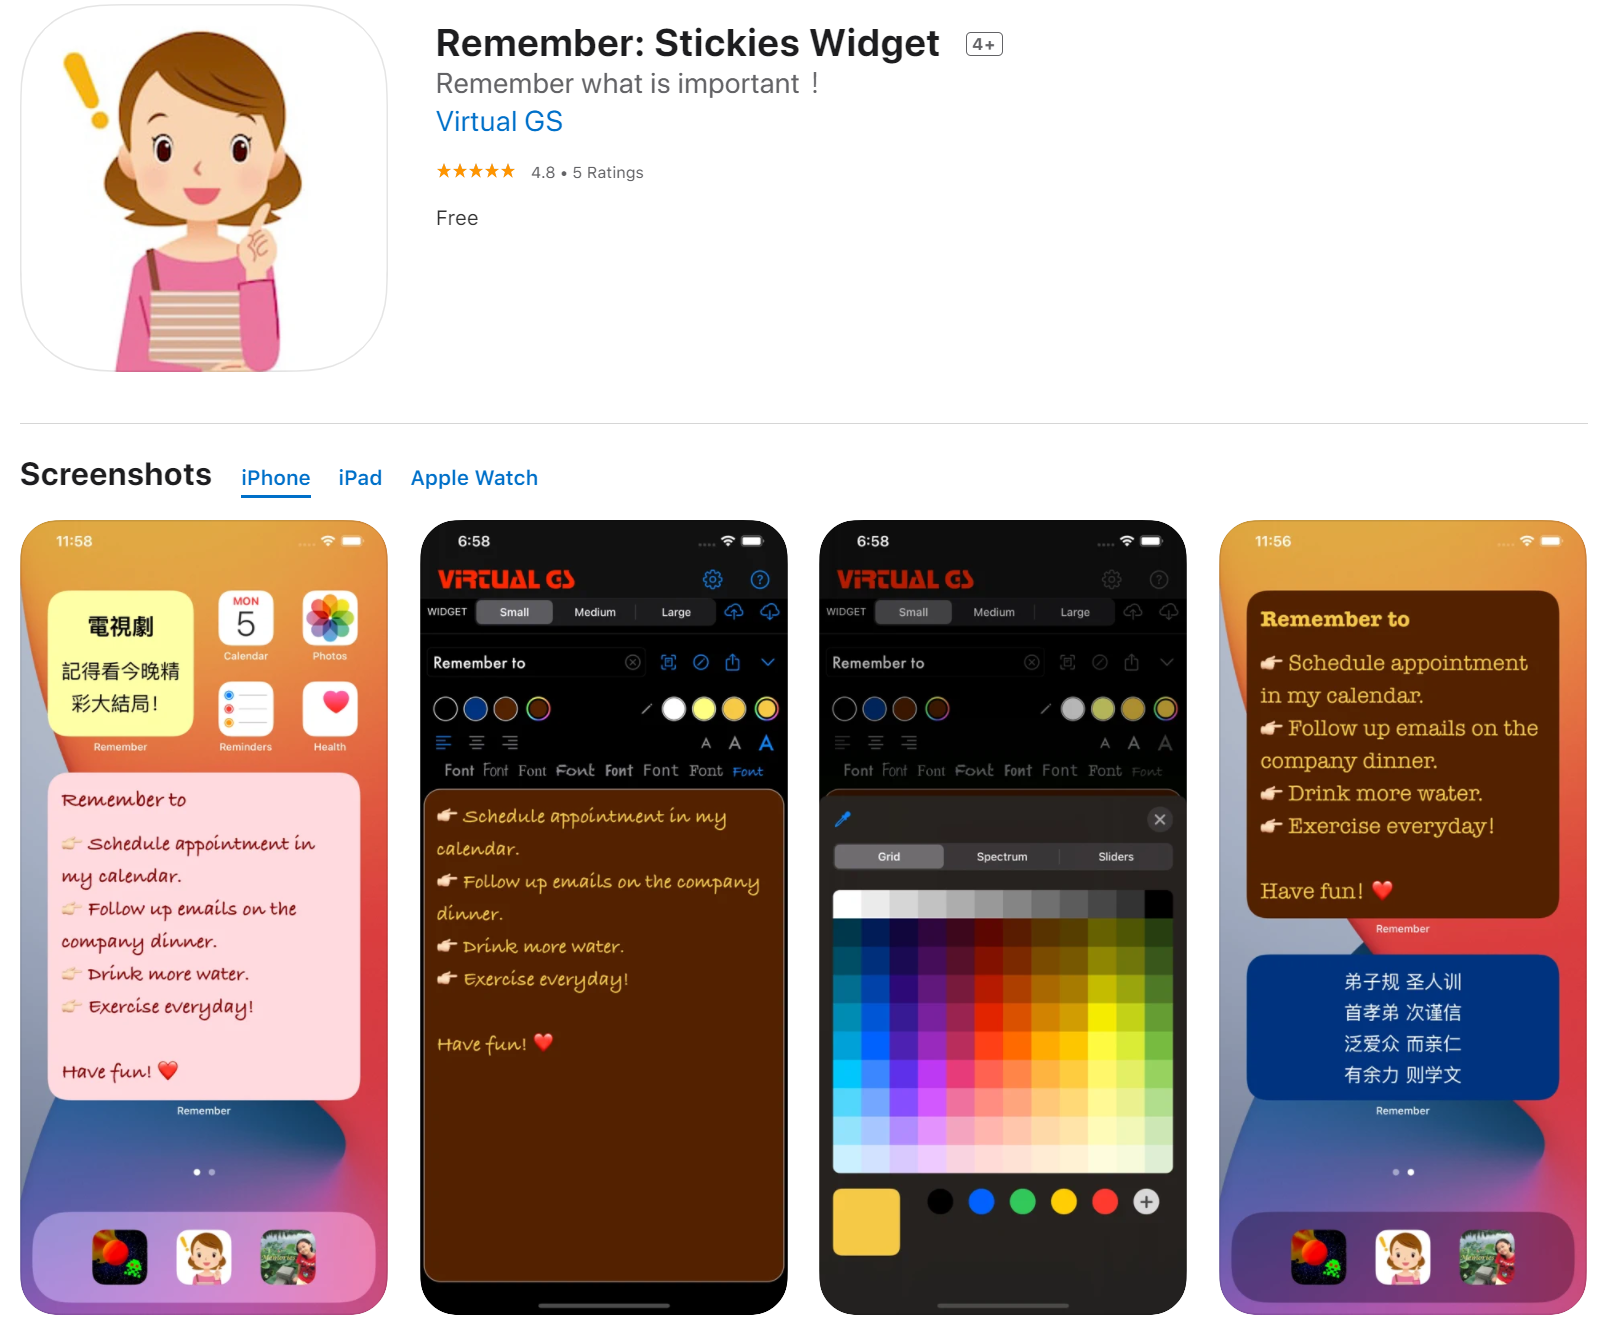 Remember: Stickies Widget by Virtual GS